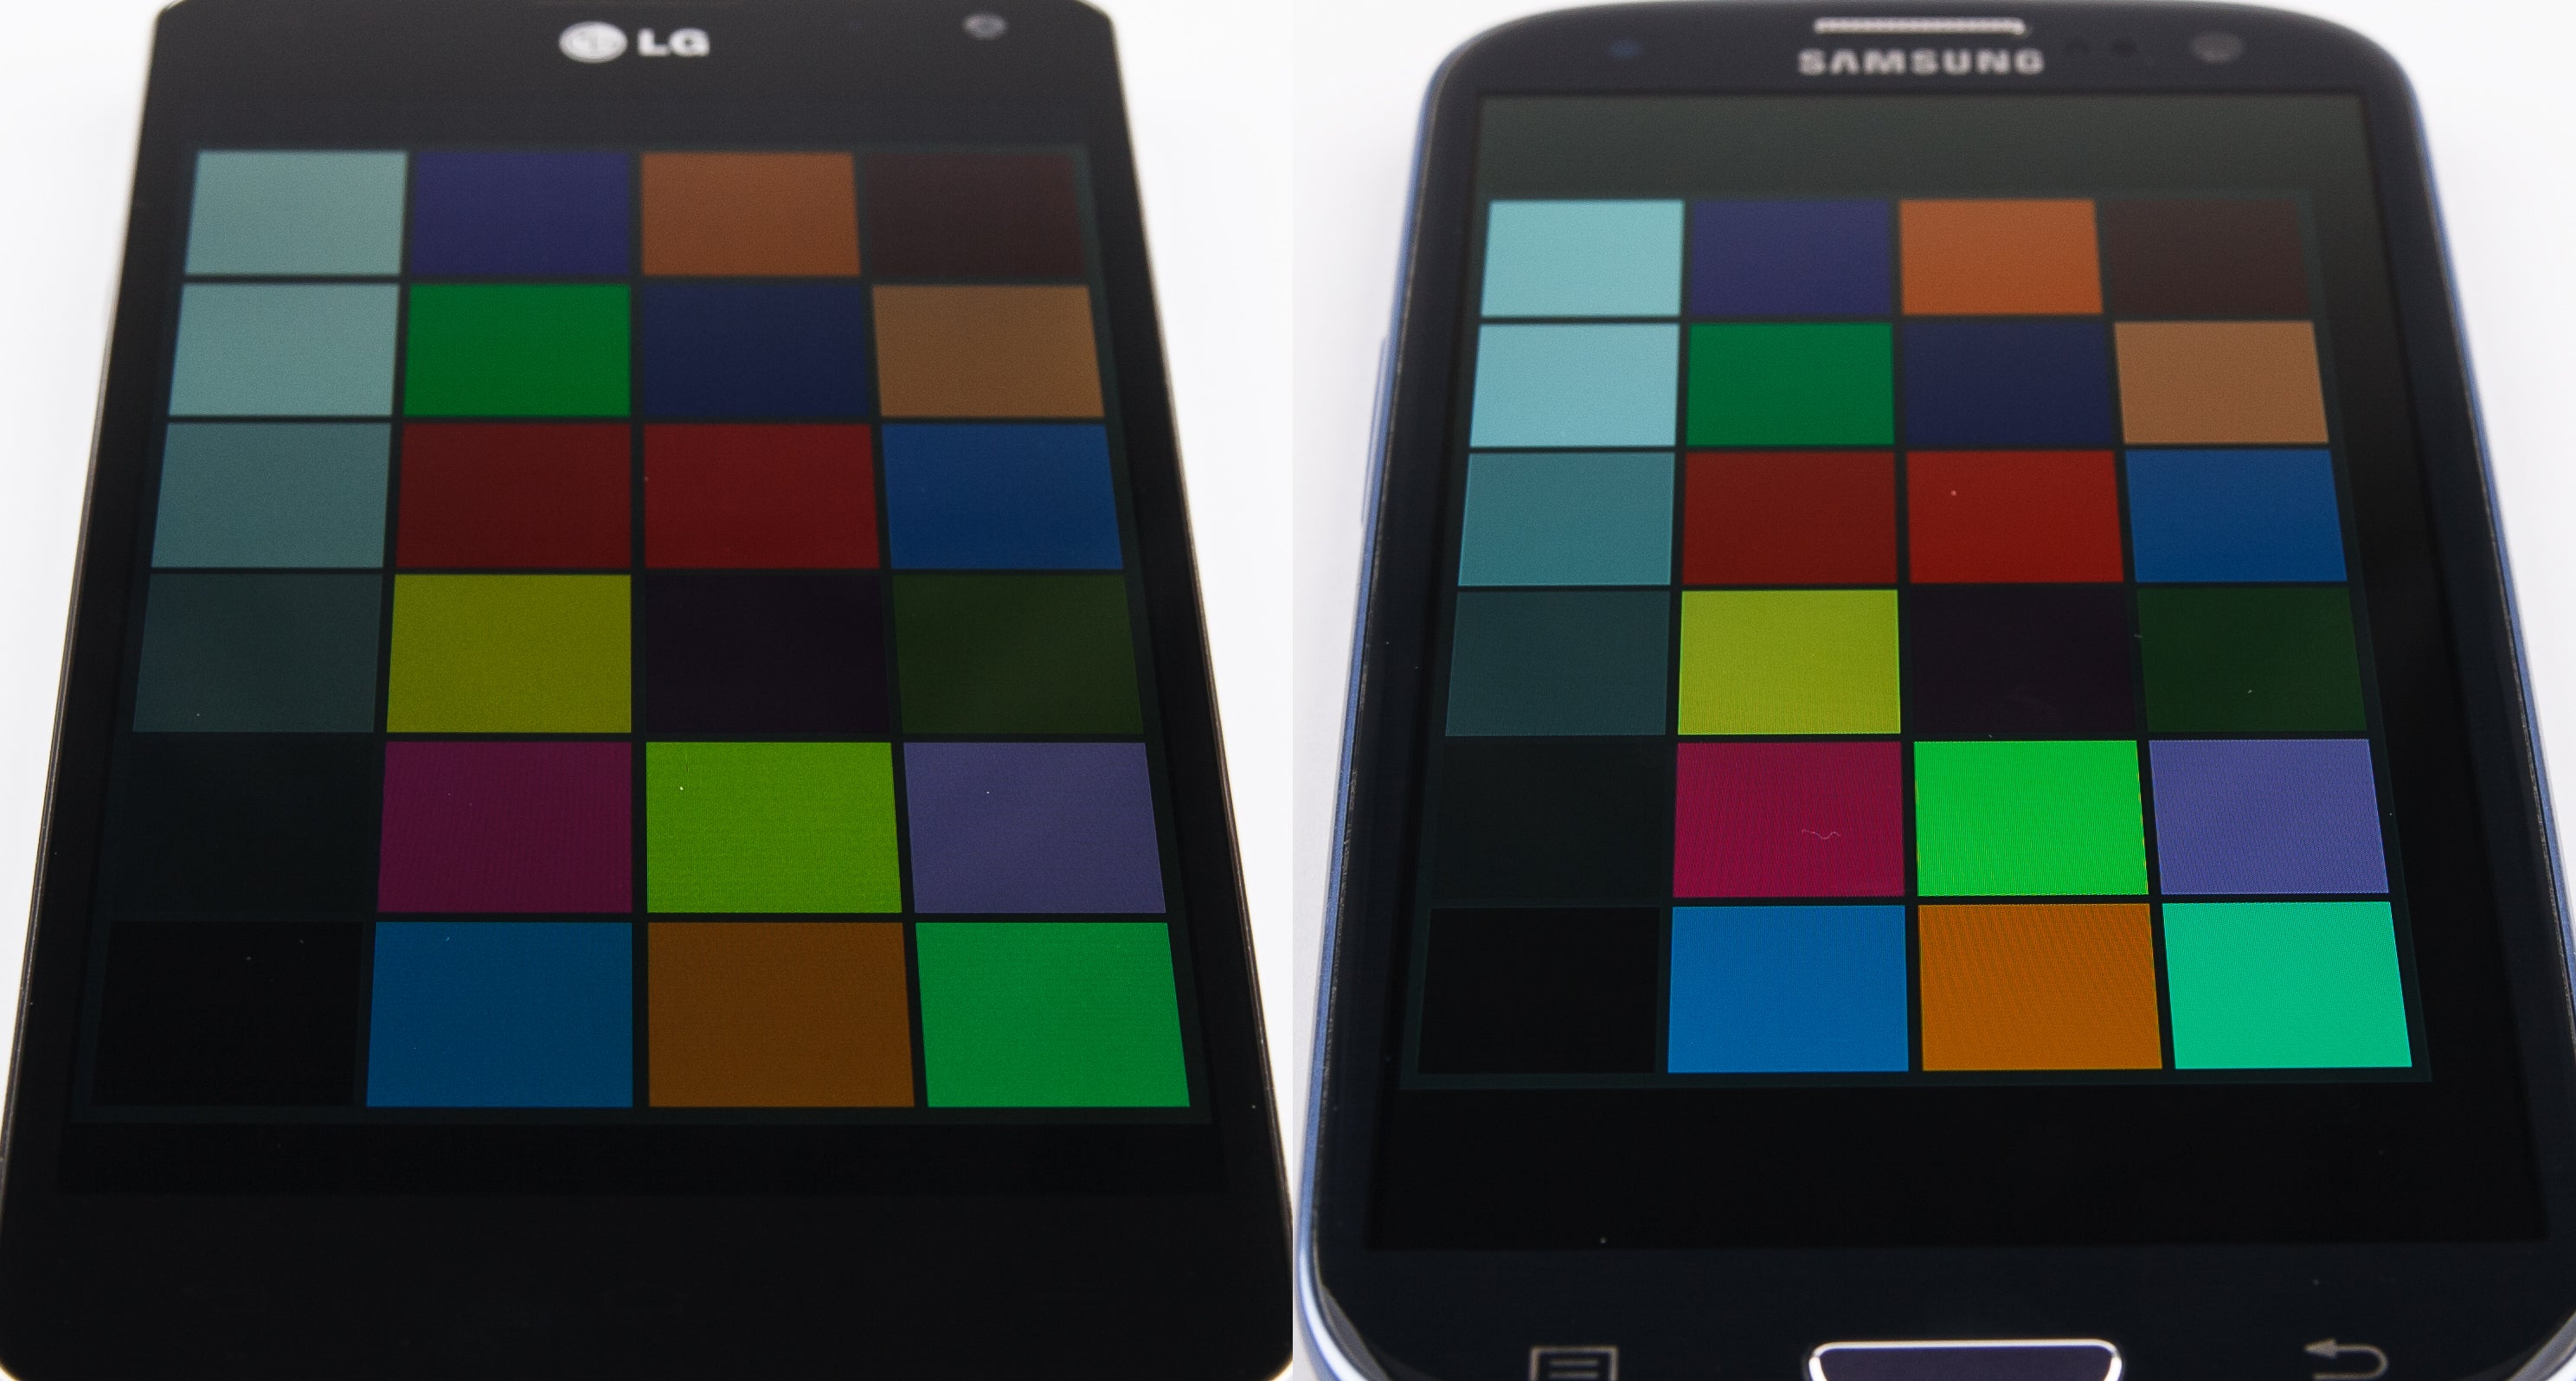 Although the Optimus G loses some brightness when tilted to its side, it does retain its very natural colors - LG Optimus G vs Samsung Galaxy S III: screen comparison